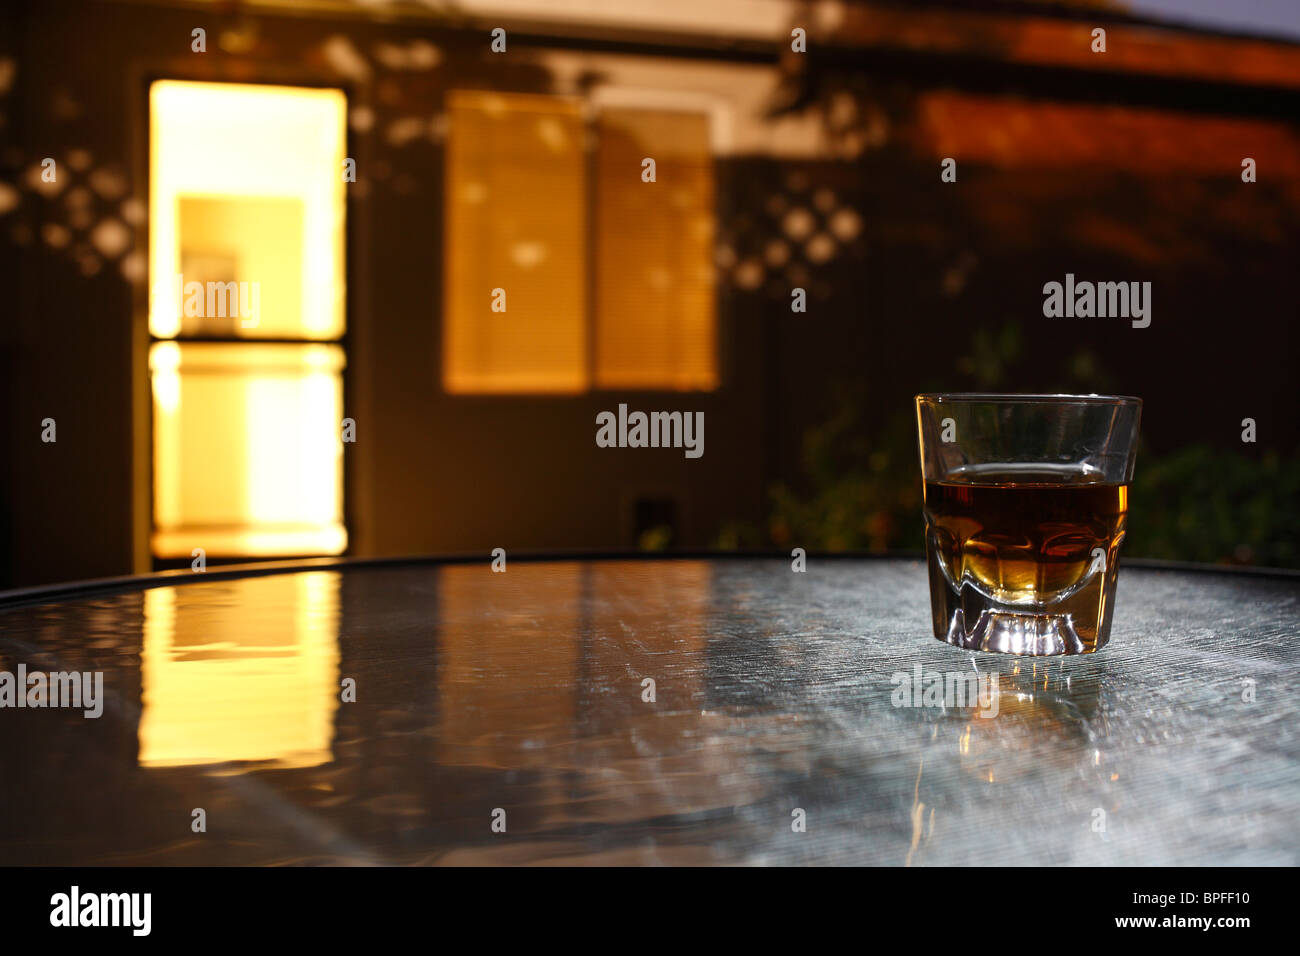 Bourbon whiskey in shot glass on glass table with house in background at night Stock Photo